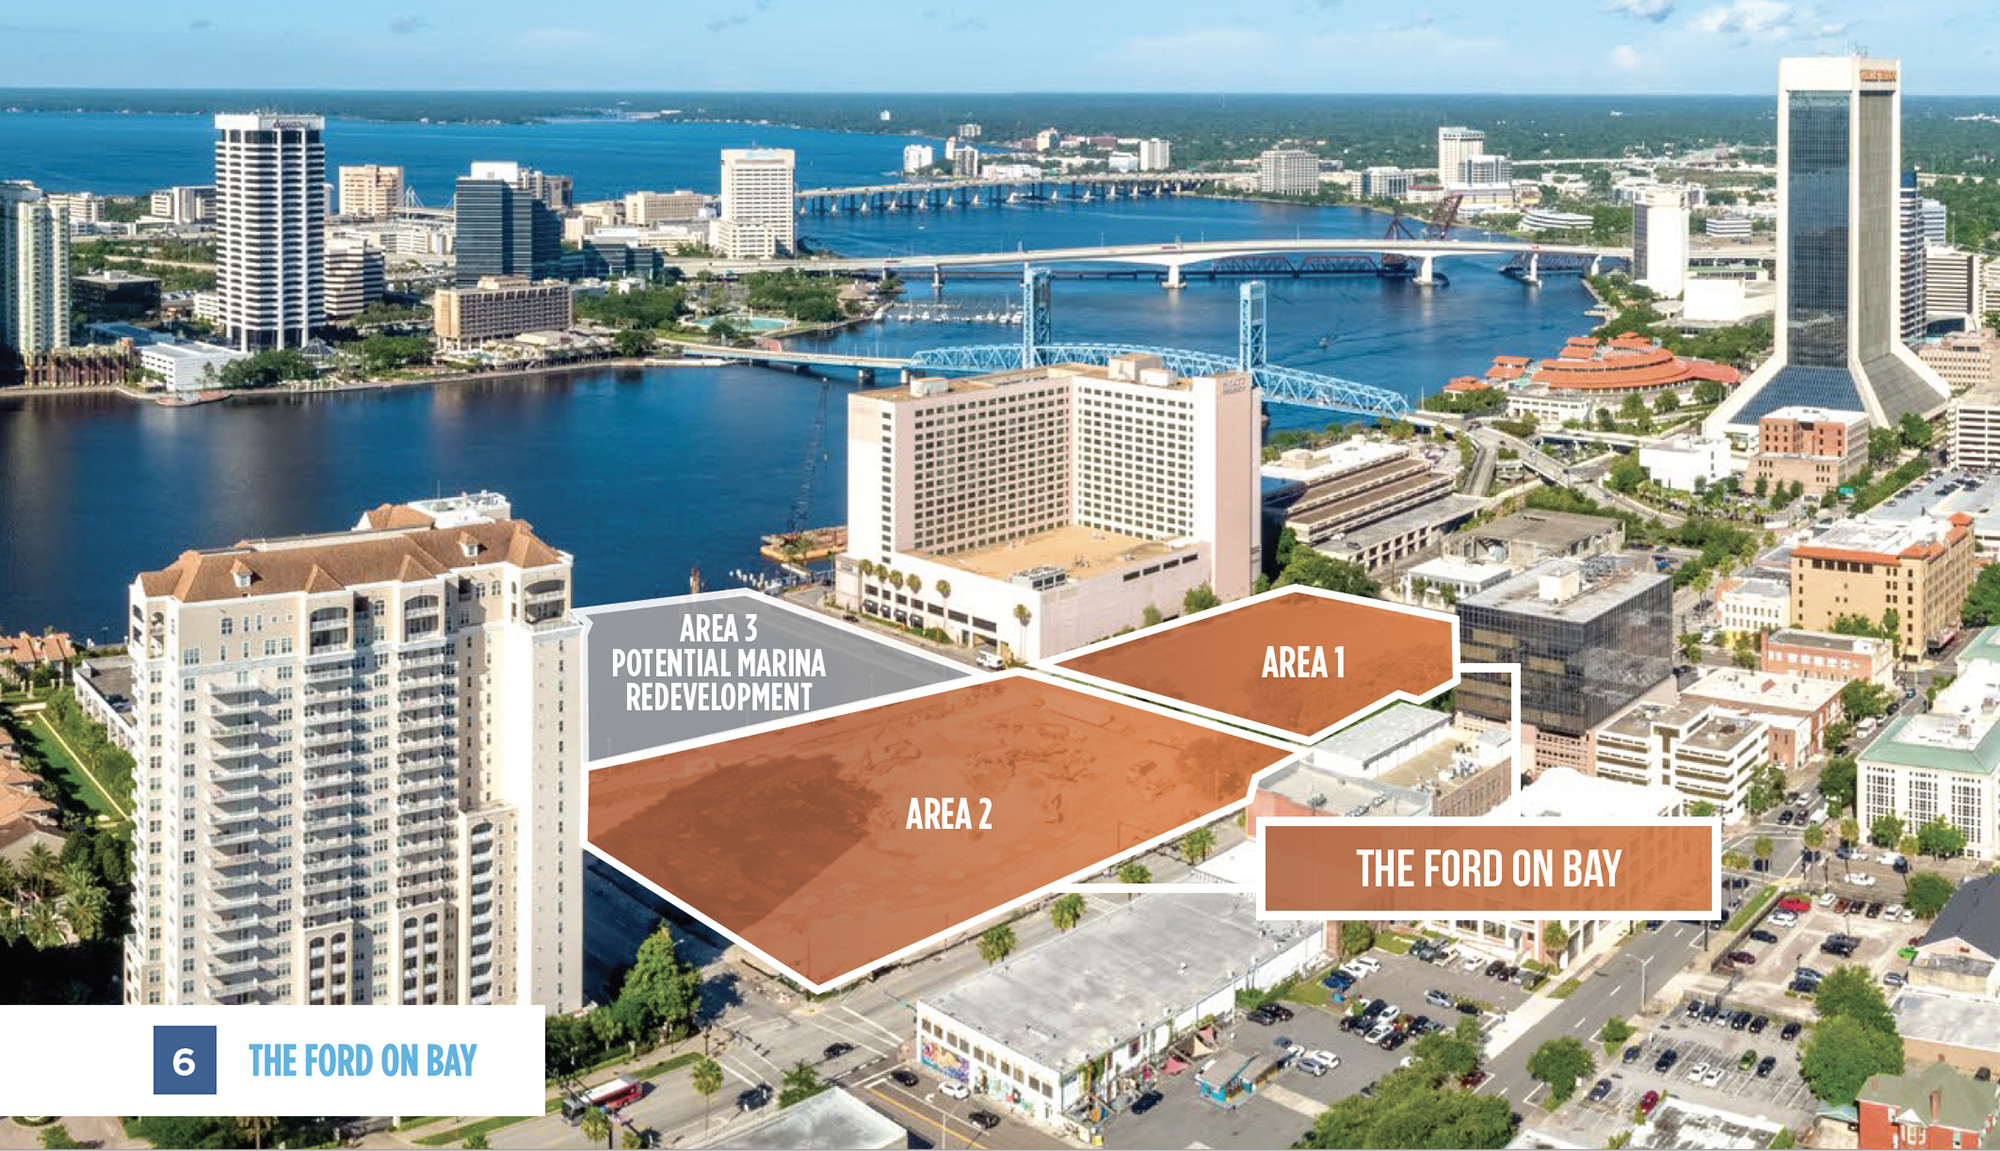 The Ford on Bay site in Downtown Jacksonville.